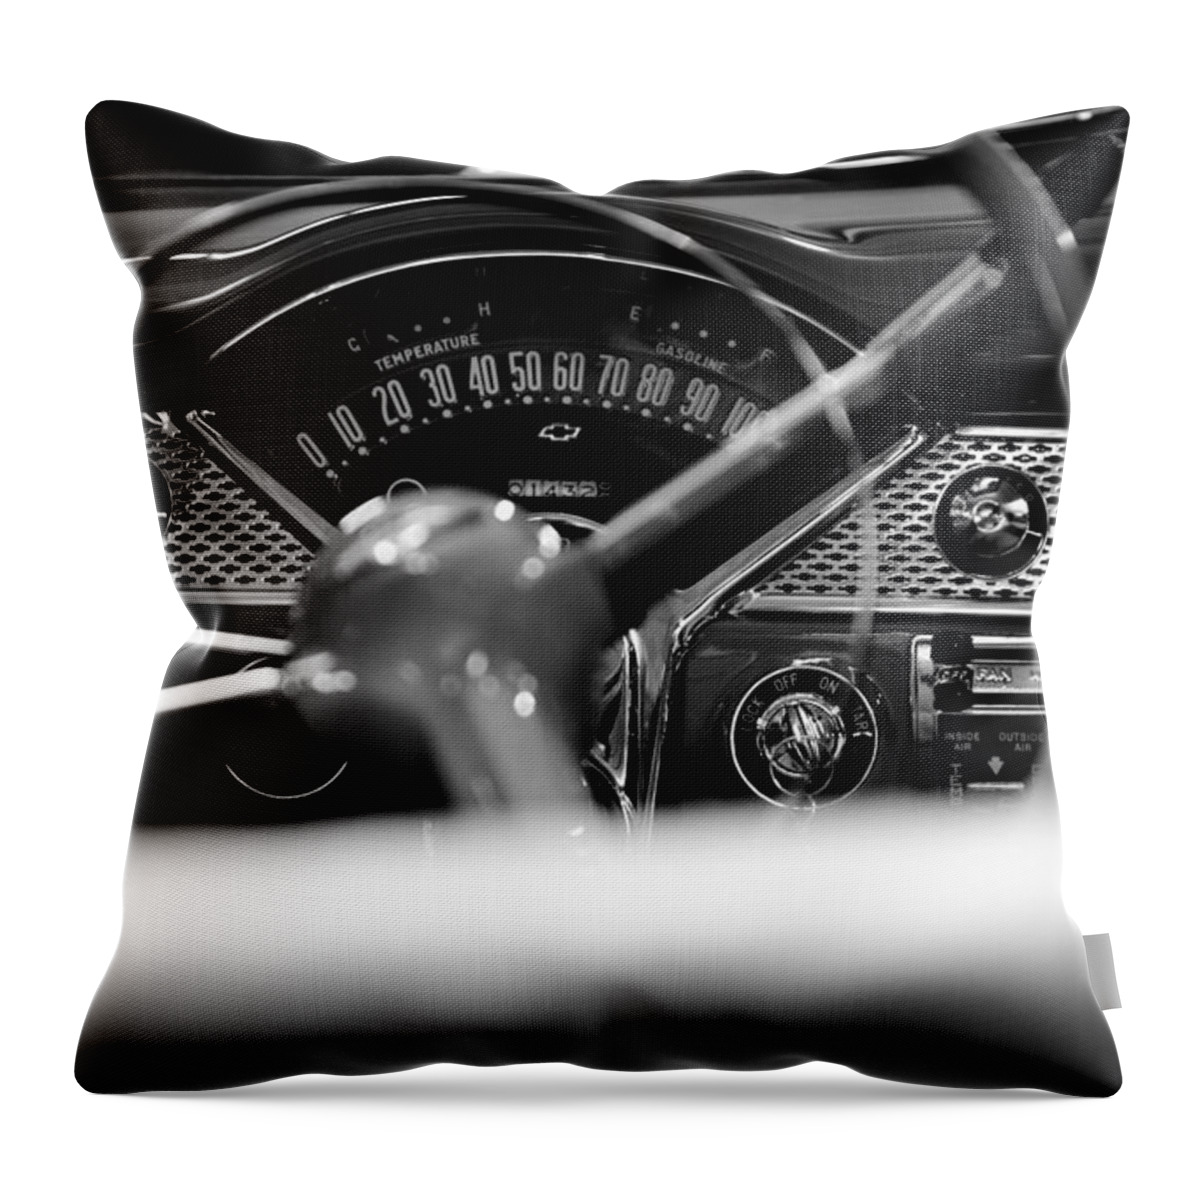 1955 Bel Air Throw Pillow featuring the photograph 1955 Chevy Bel Air Dashboard in Black and White by Sebastian Musial